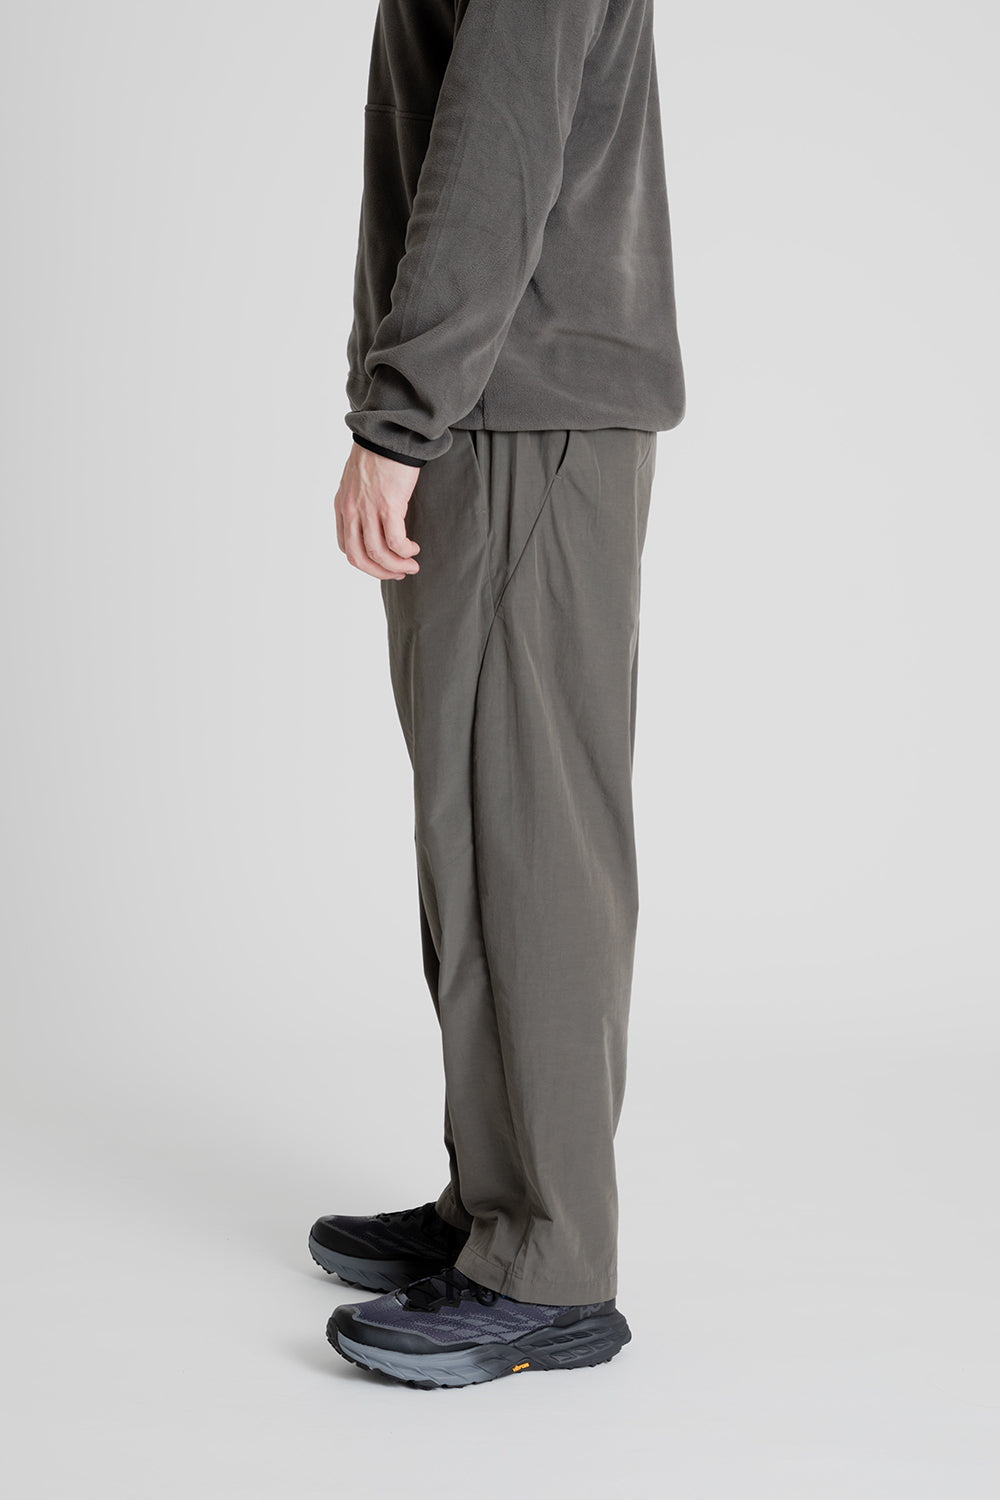 Relax Straight Easy Pants - Dark Olive